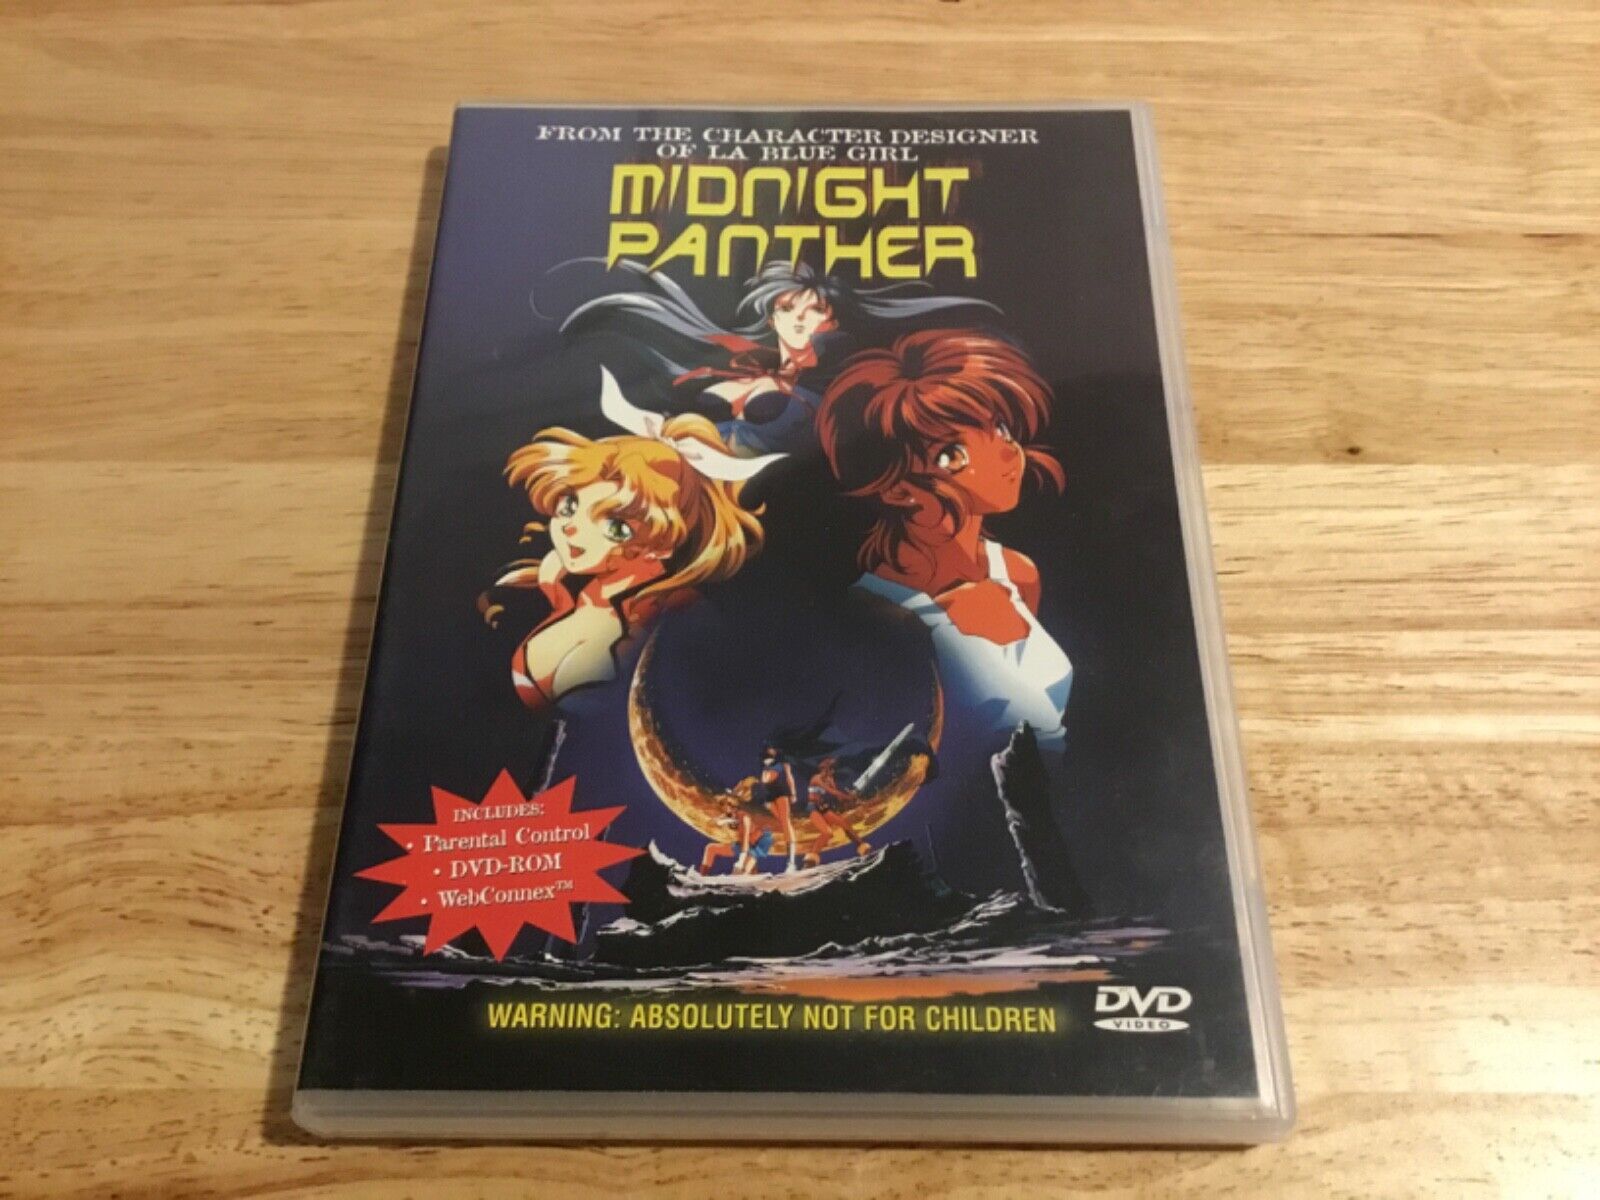 Midnight Panther (DVD, 1999) for sale online | eBay